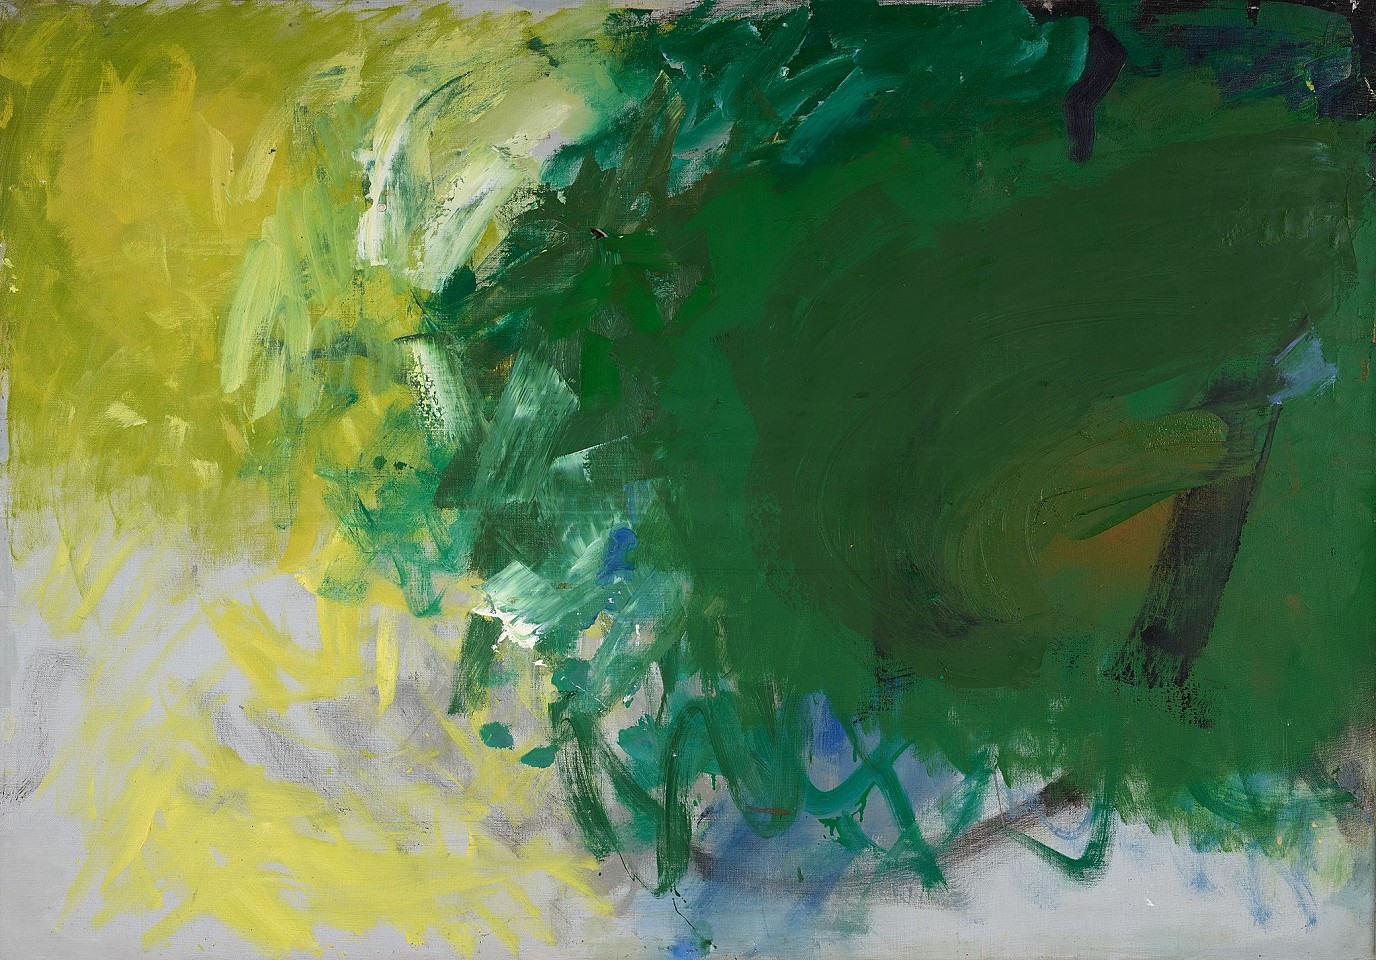 Yvonne Thomas, May Green | SOLD, 1962
Oil on canvas, 50 1/8 x 35 in. (127.3 x 88.9 cm)
THO-00013